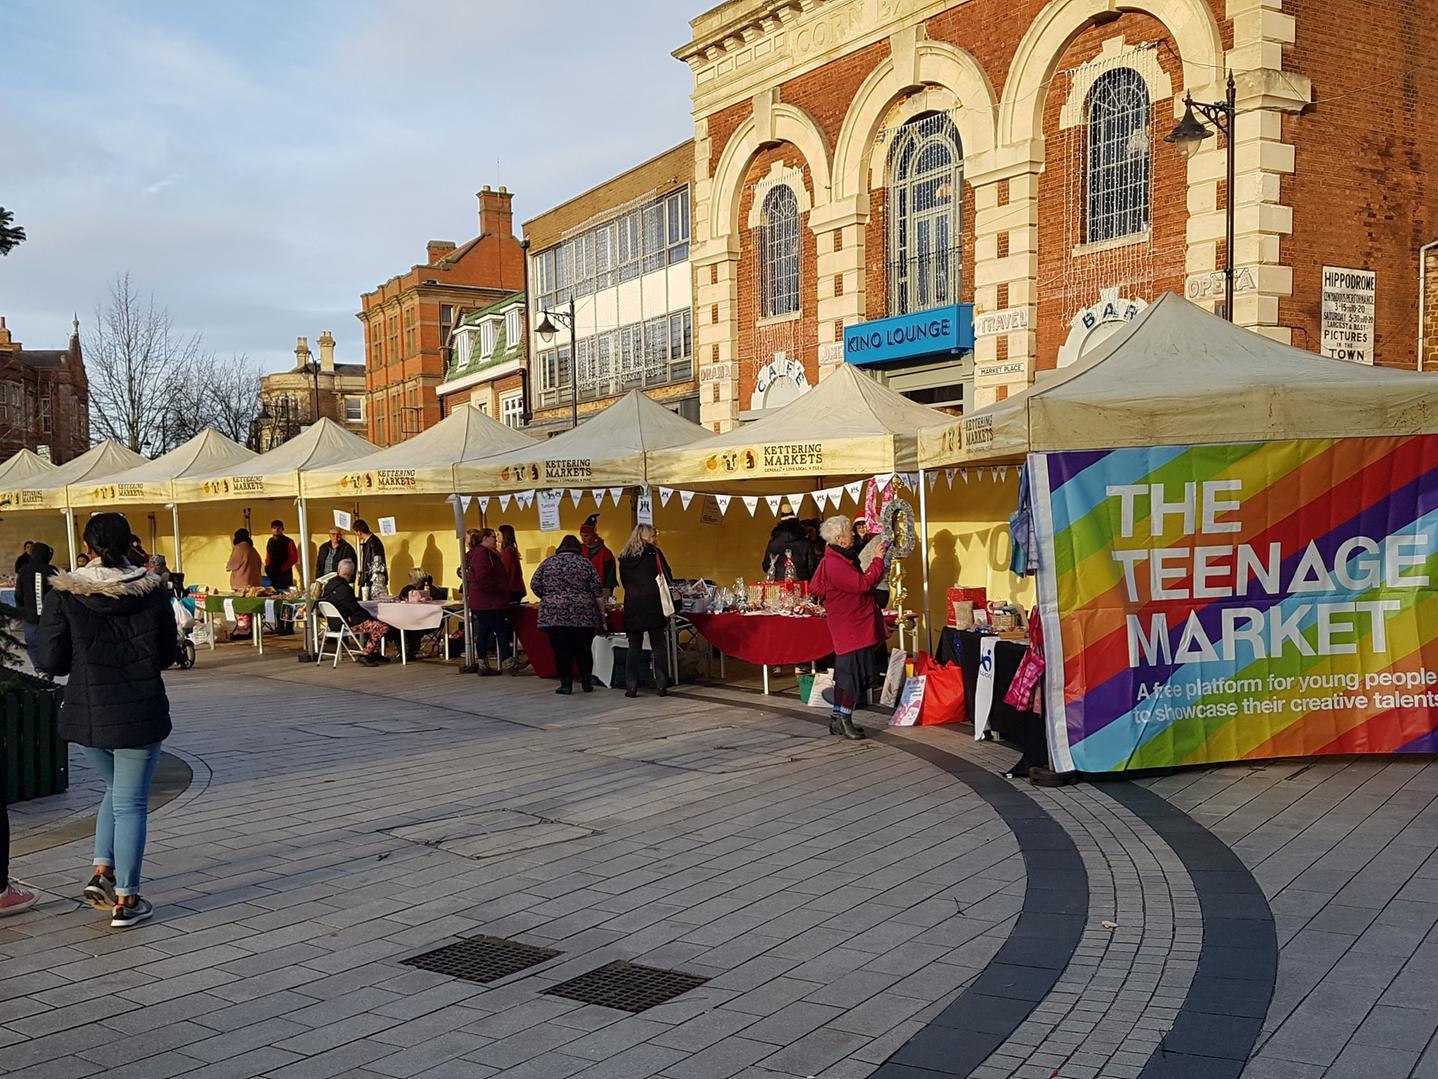 The Teenage Market is a national initiative to give young talented traders and performers a platform